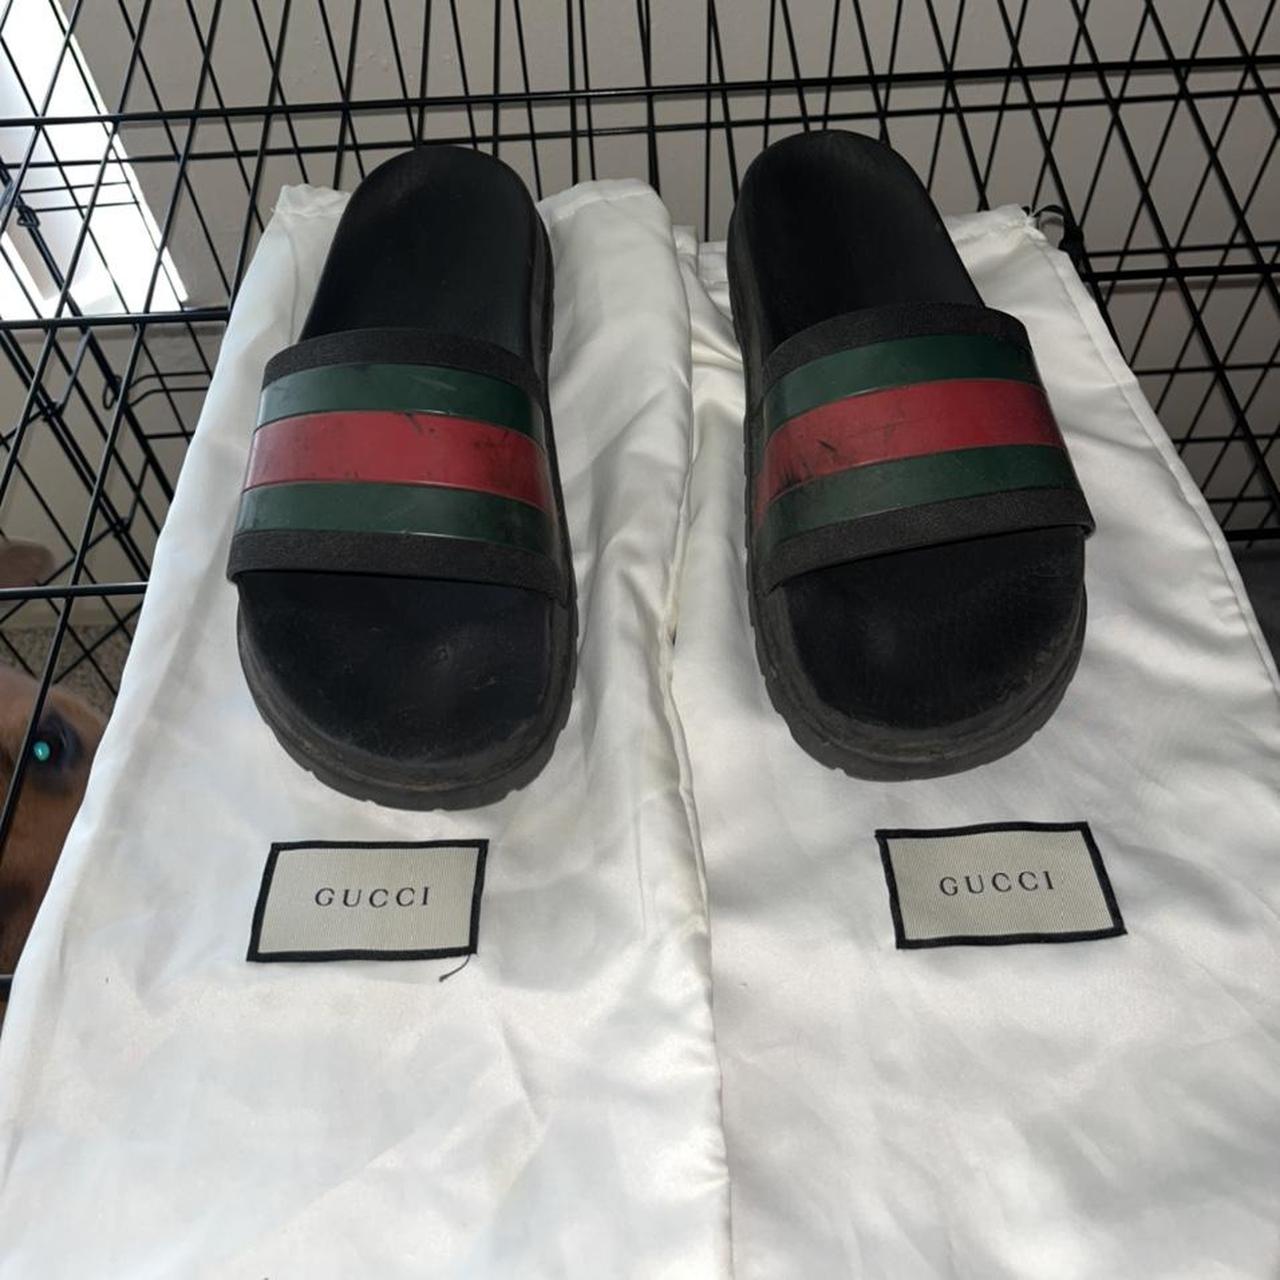 Gucci slides still has lots of life left in these... - Depop